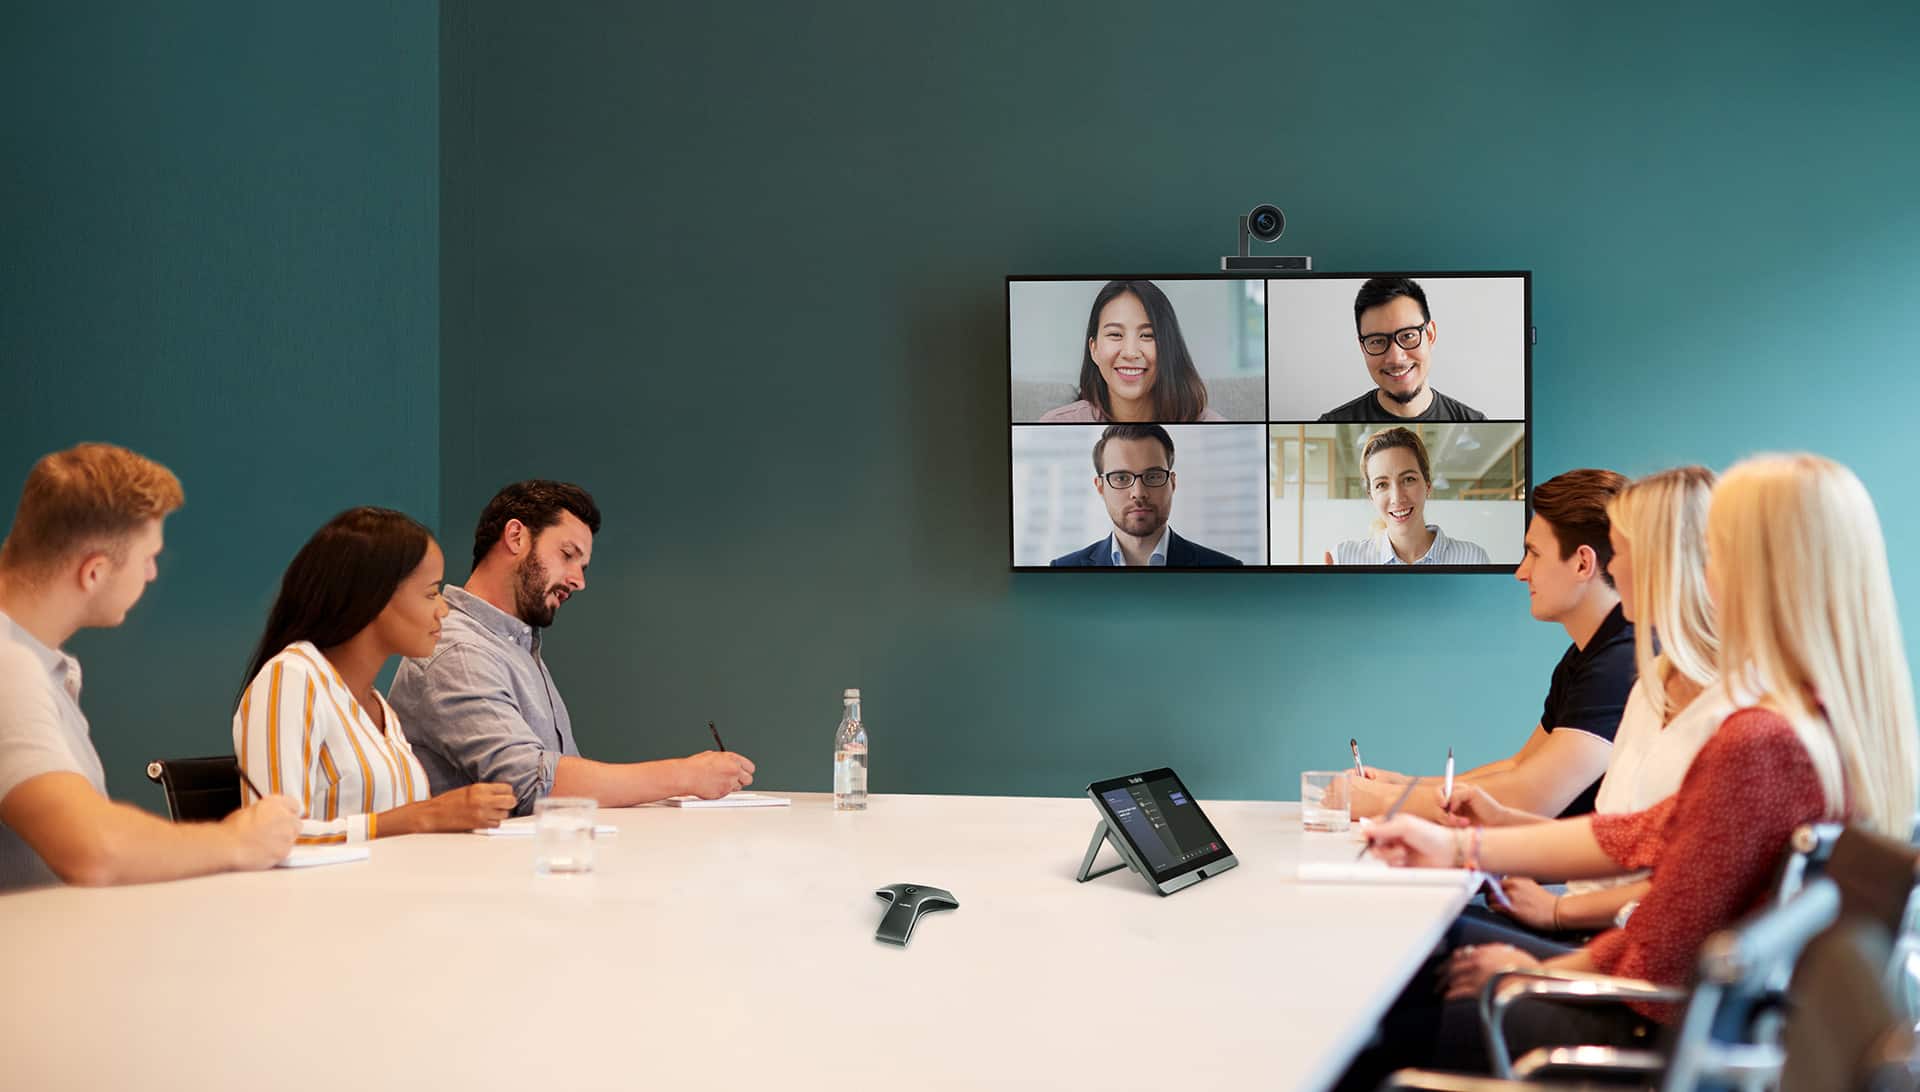 Yealink hybrid meeting technology supporting a conference room meeting